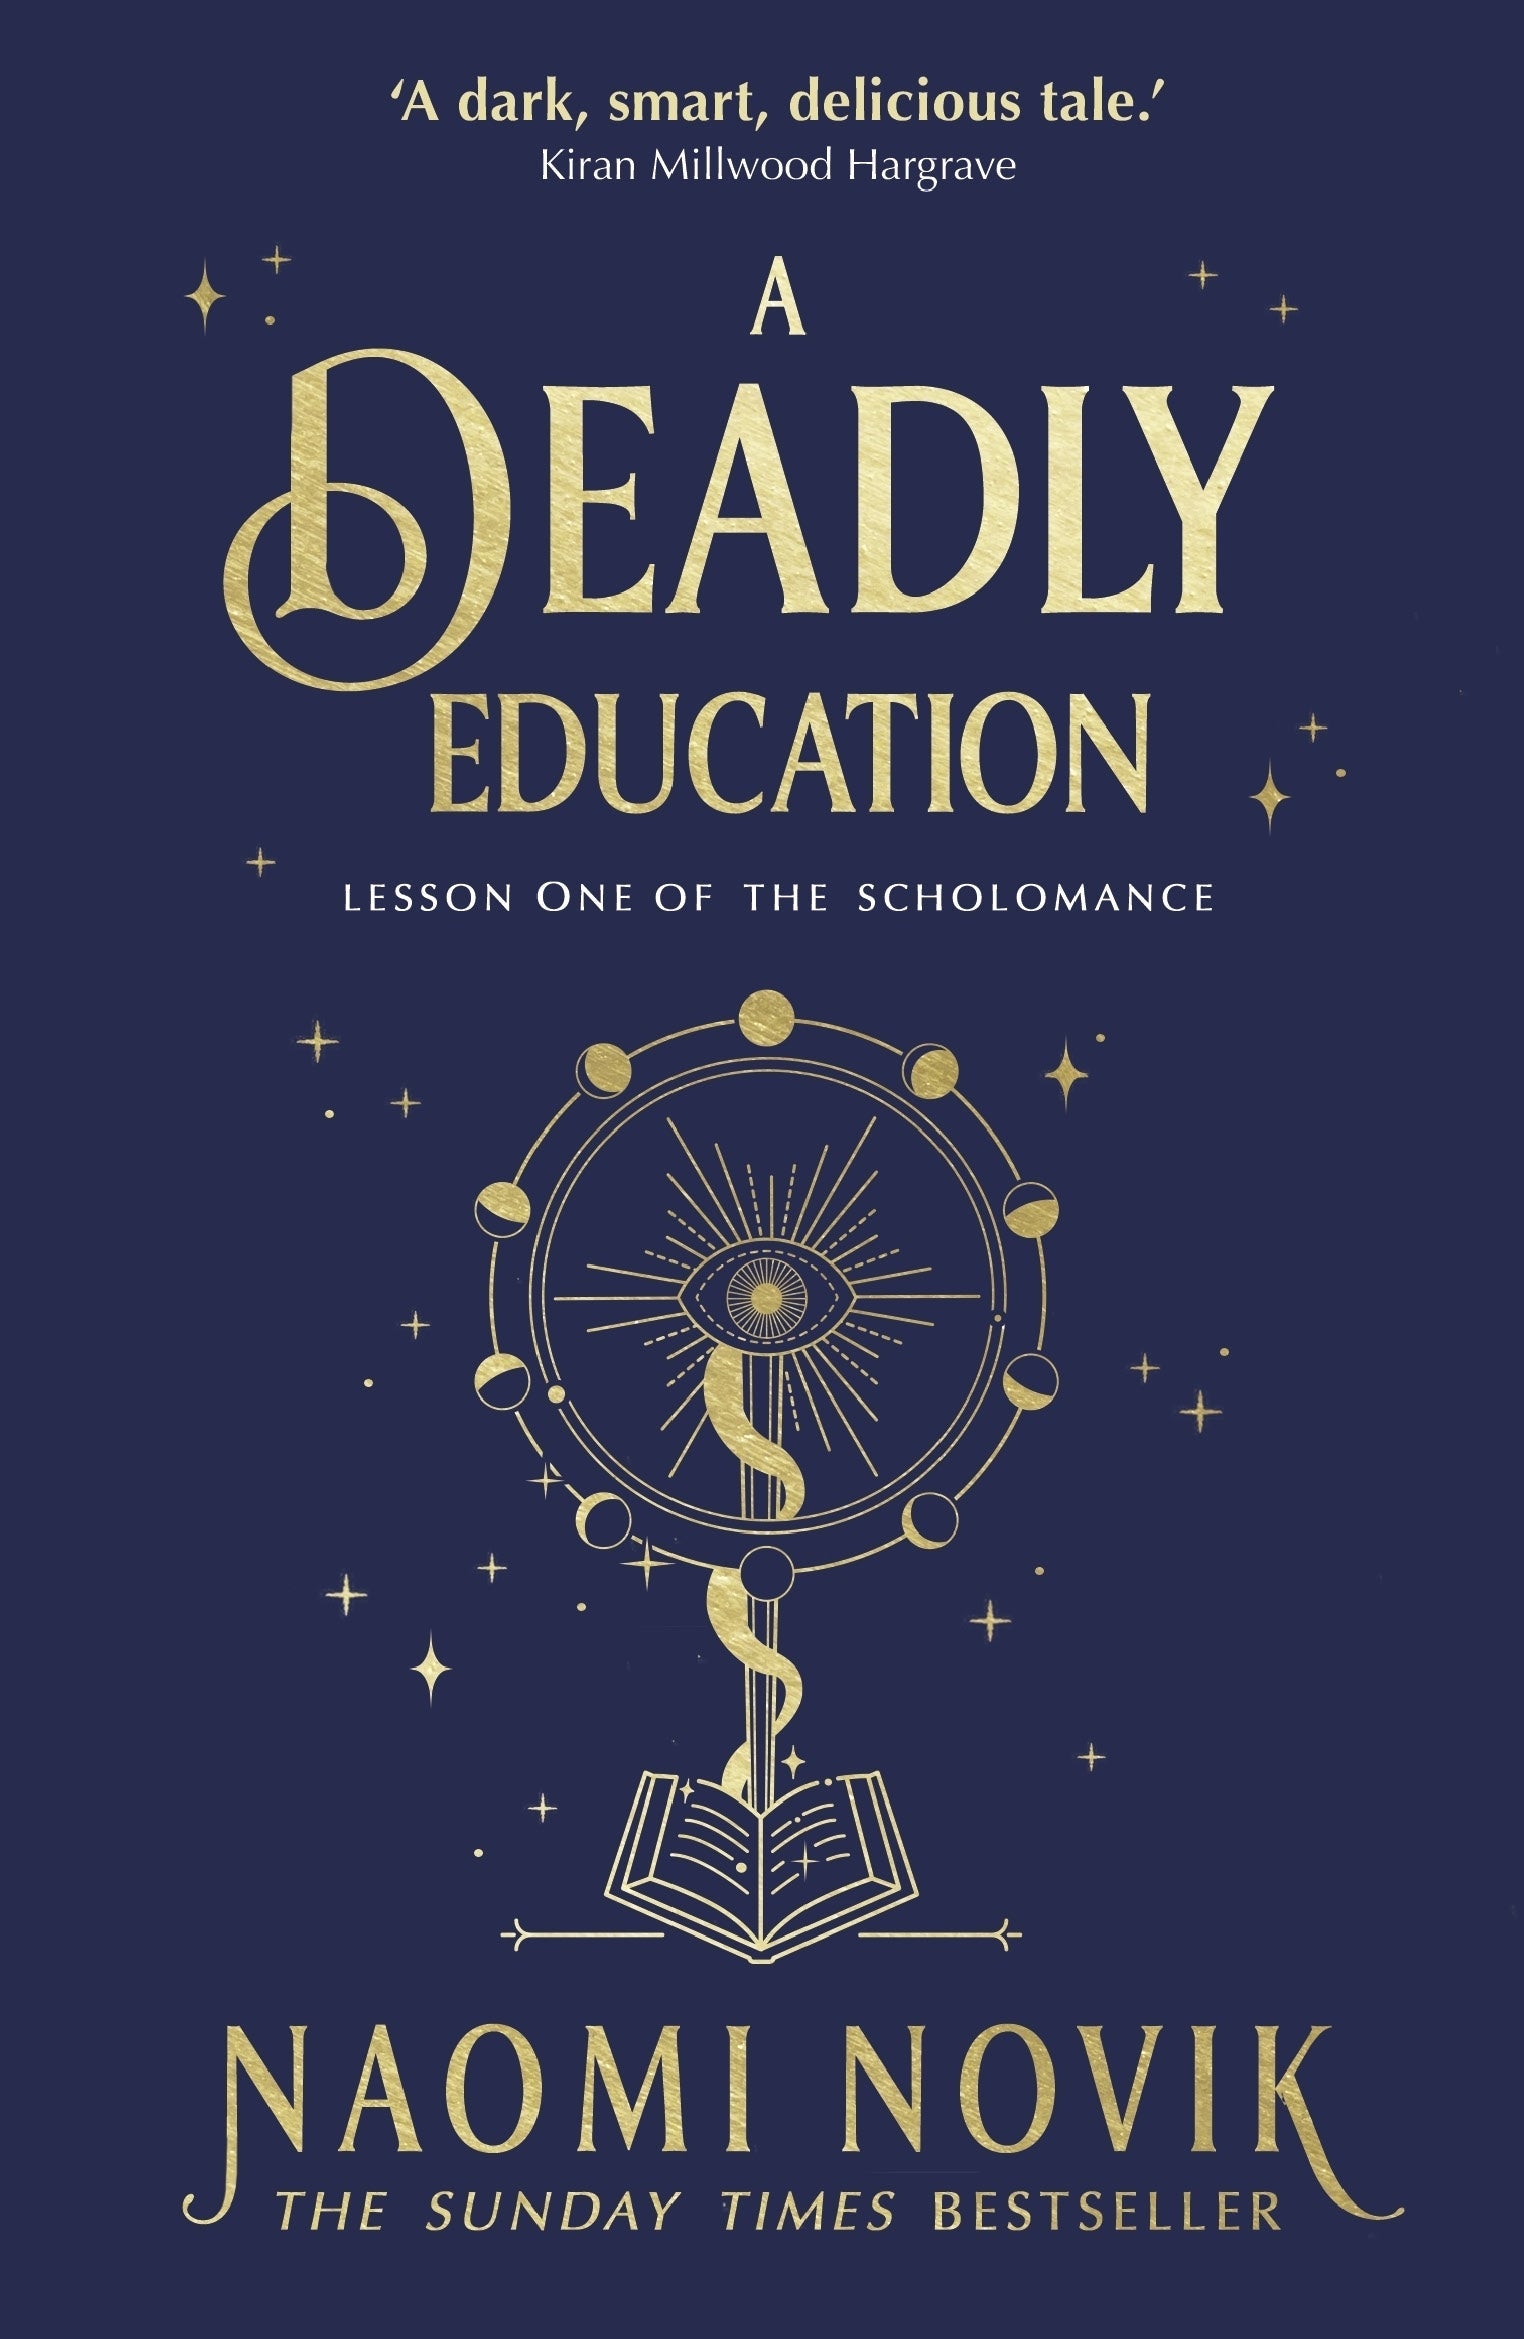 A Deadly Education by Naomi Novik  Buy online from Aotearoa bookstore  Parallel